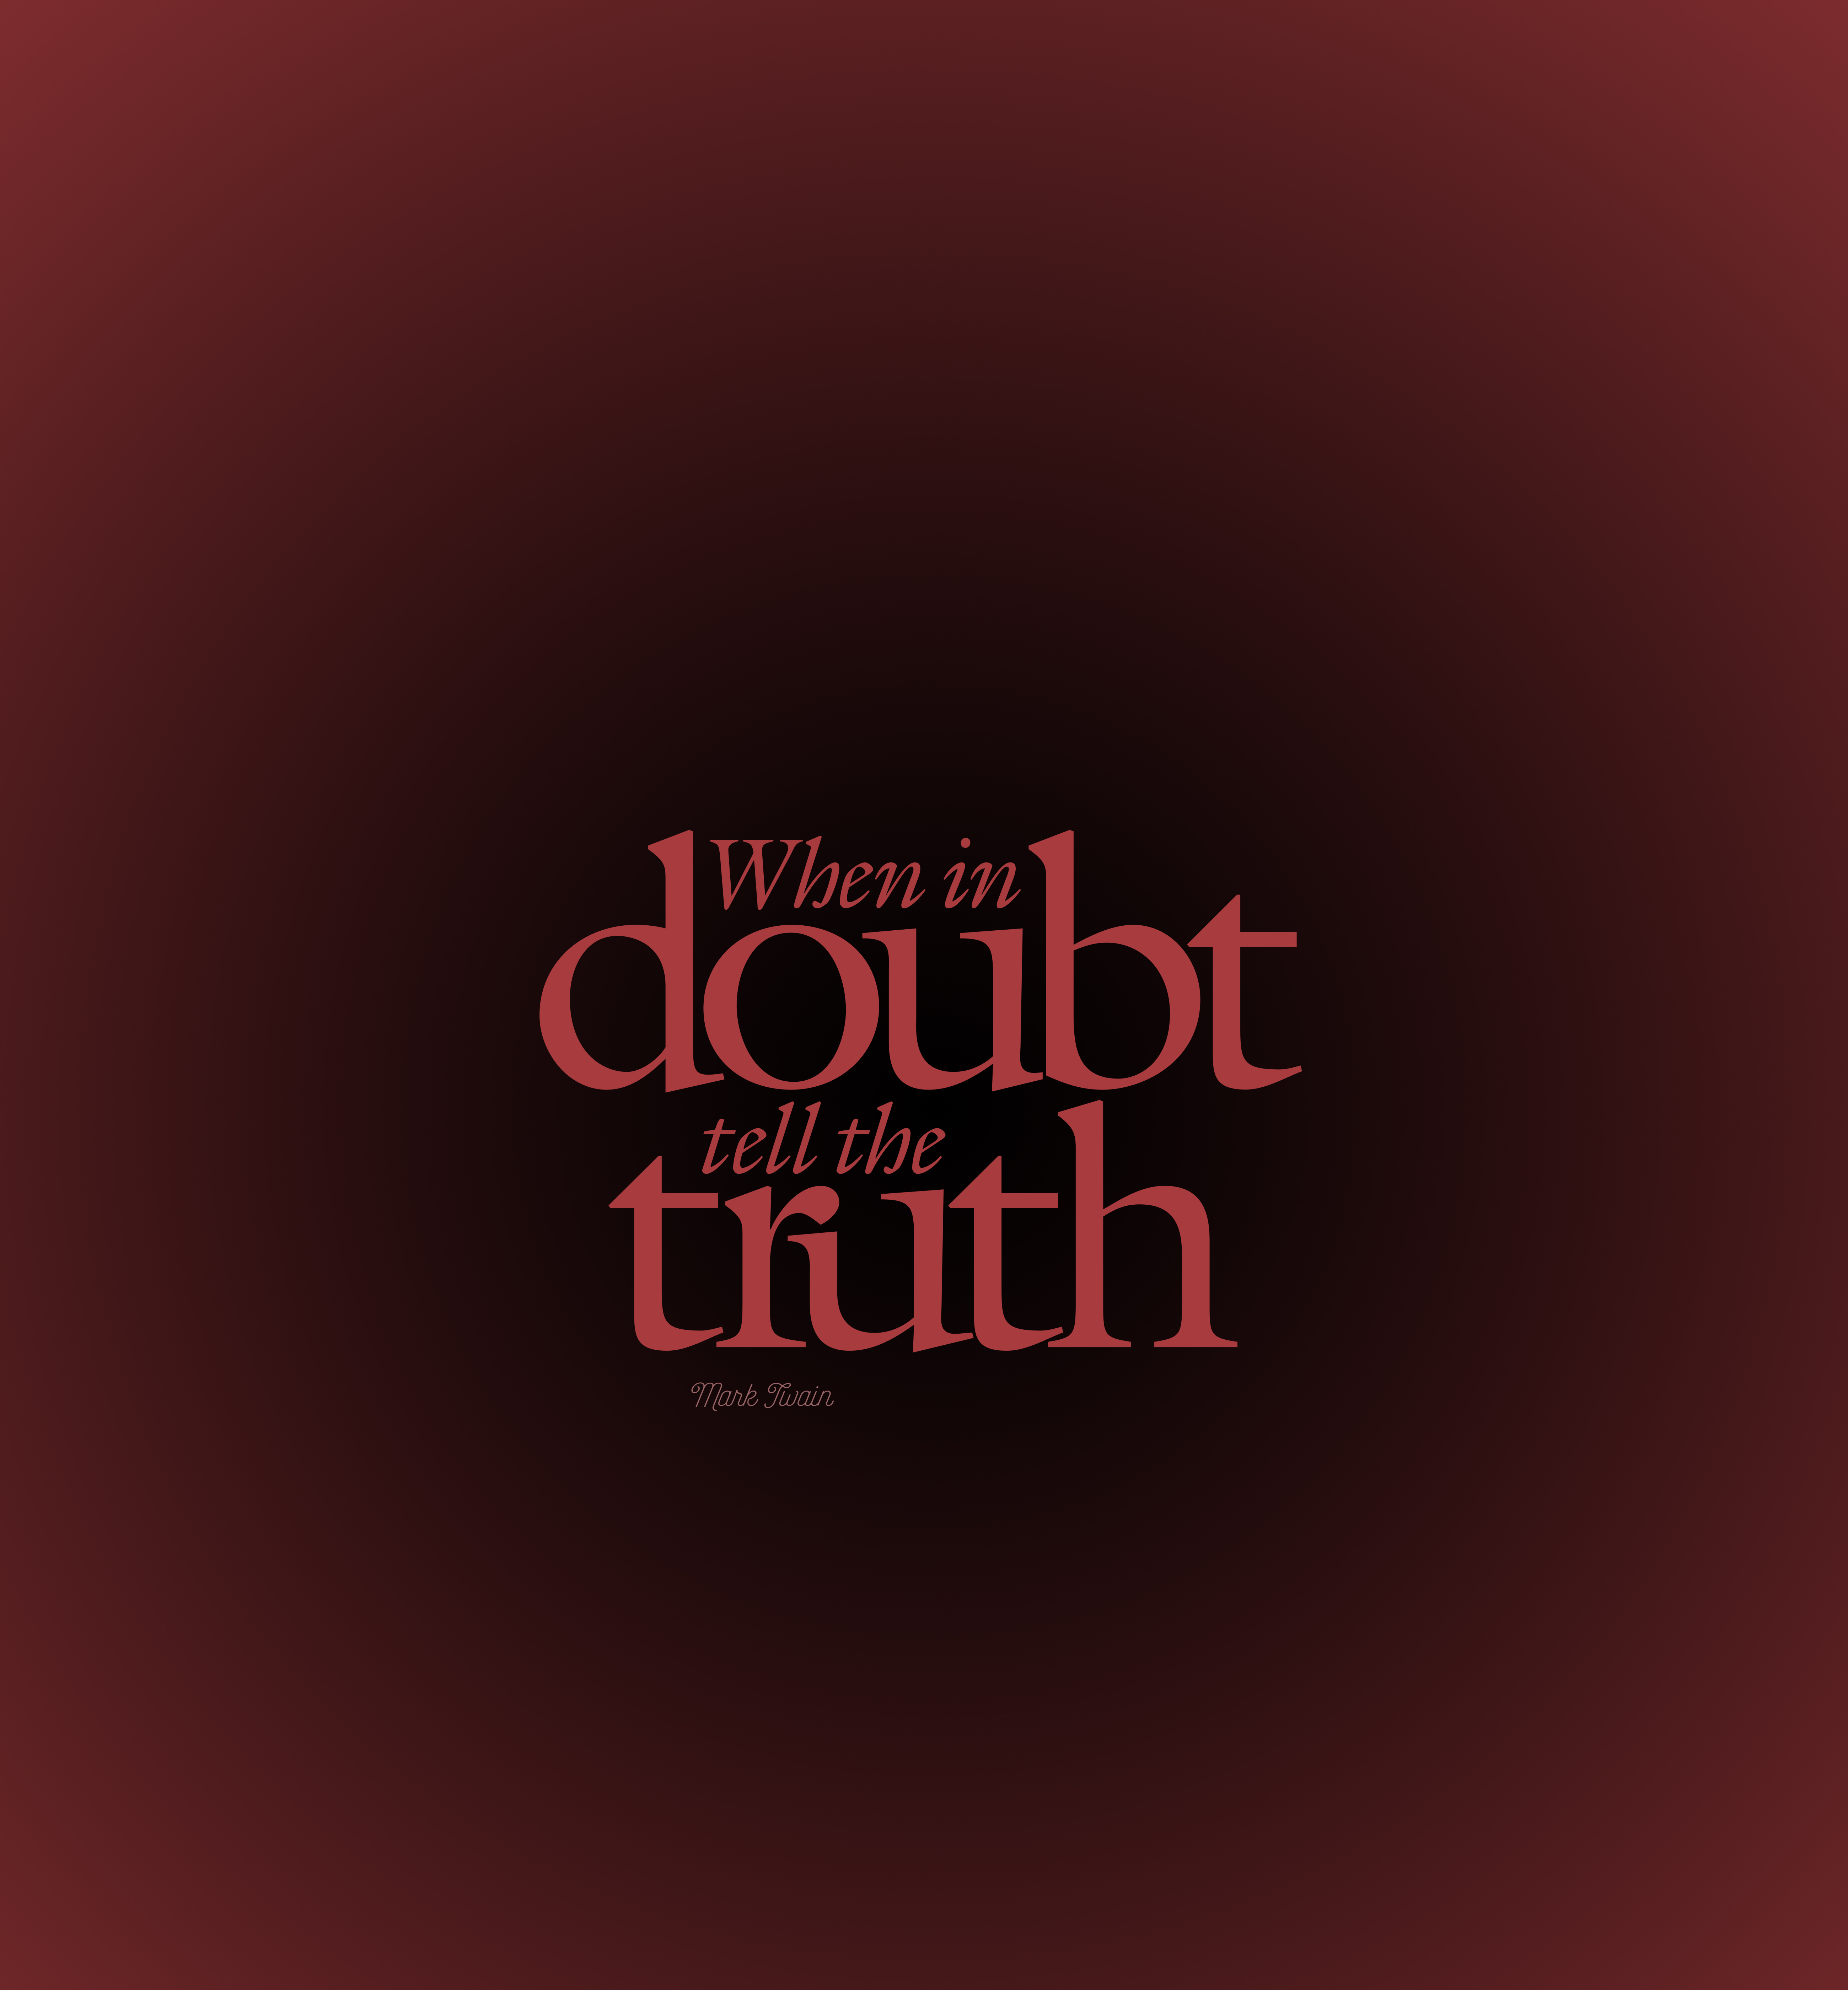 quotation, words, quote, utterance, truth, really, doubt, axiom 2160p